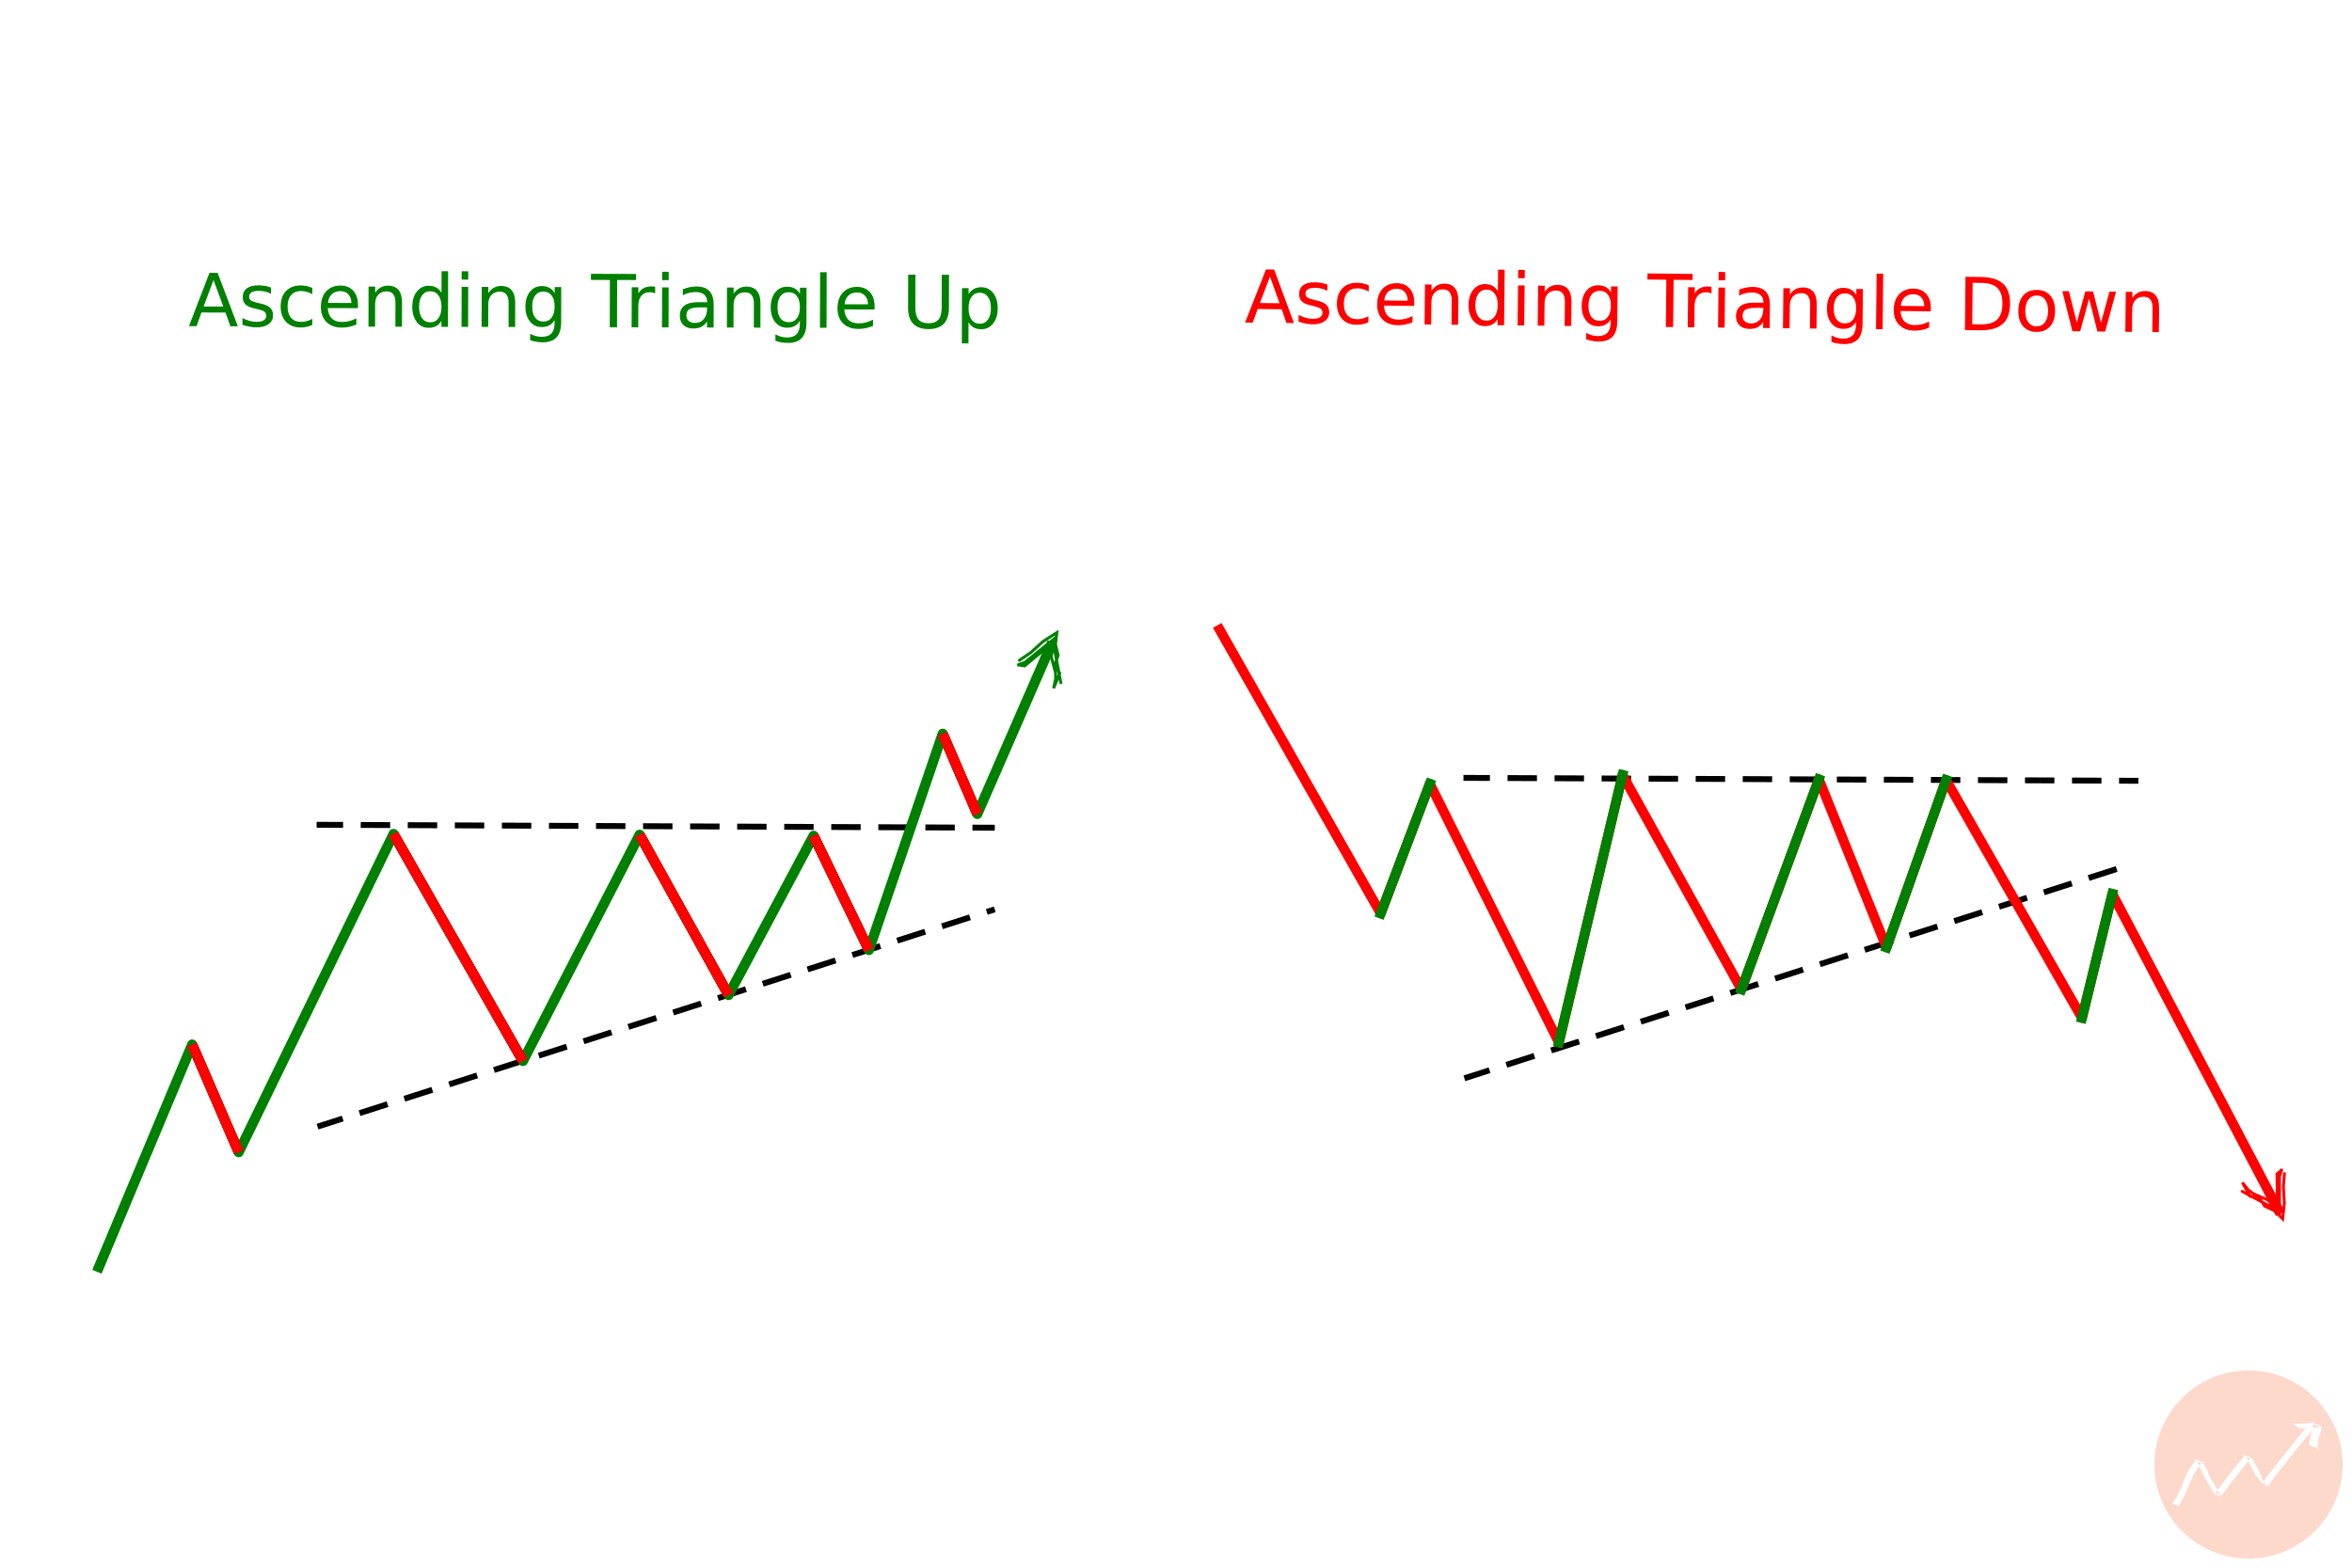 Ascending Triangles in an Up and Down Trend